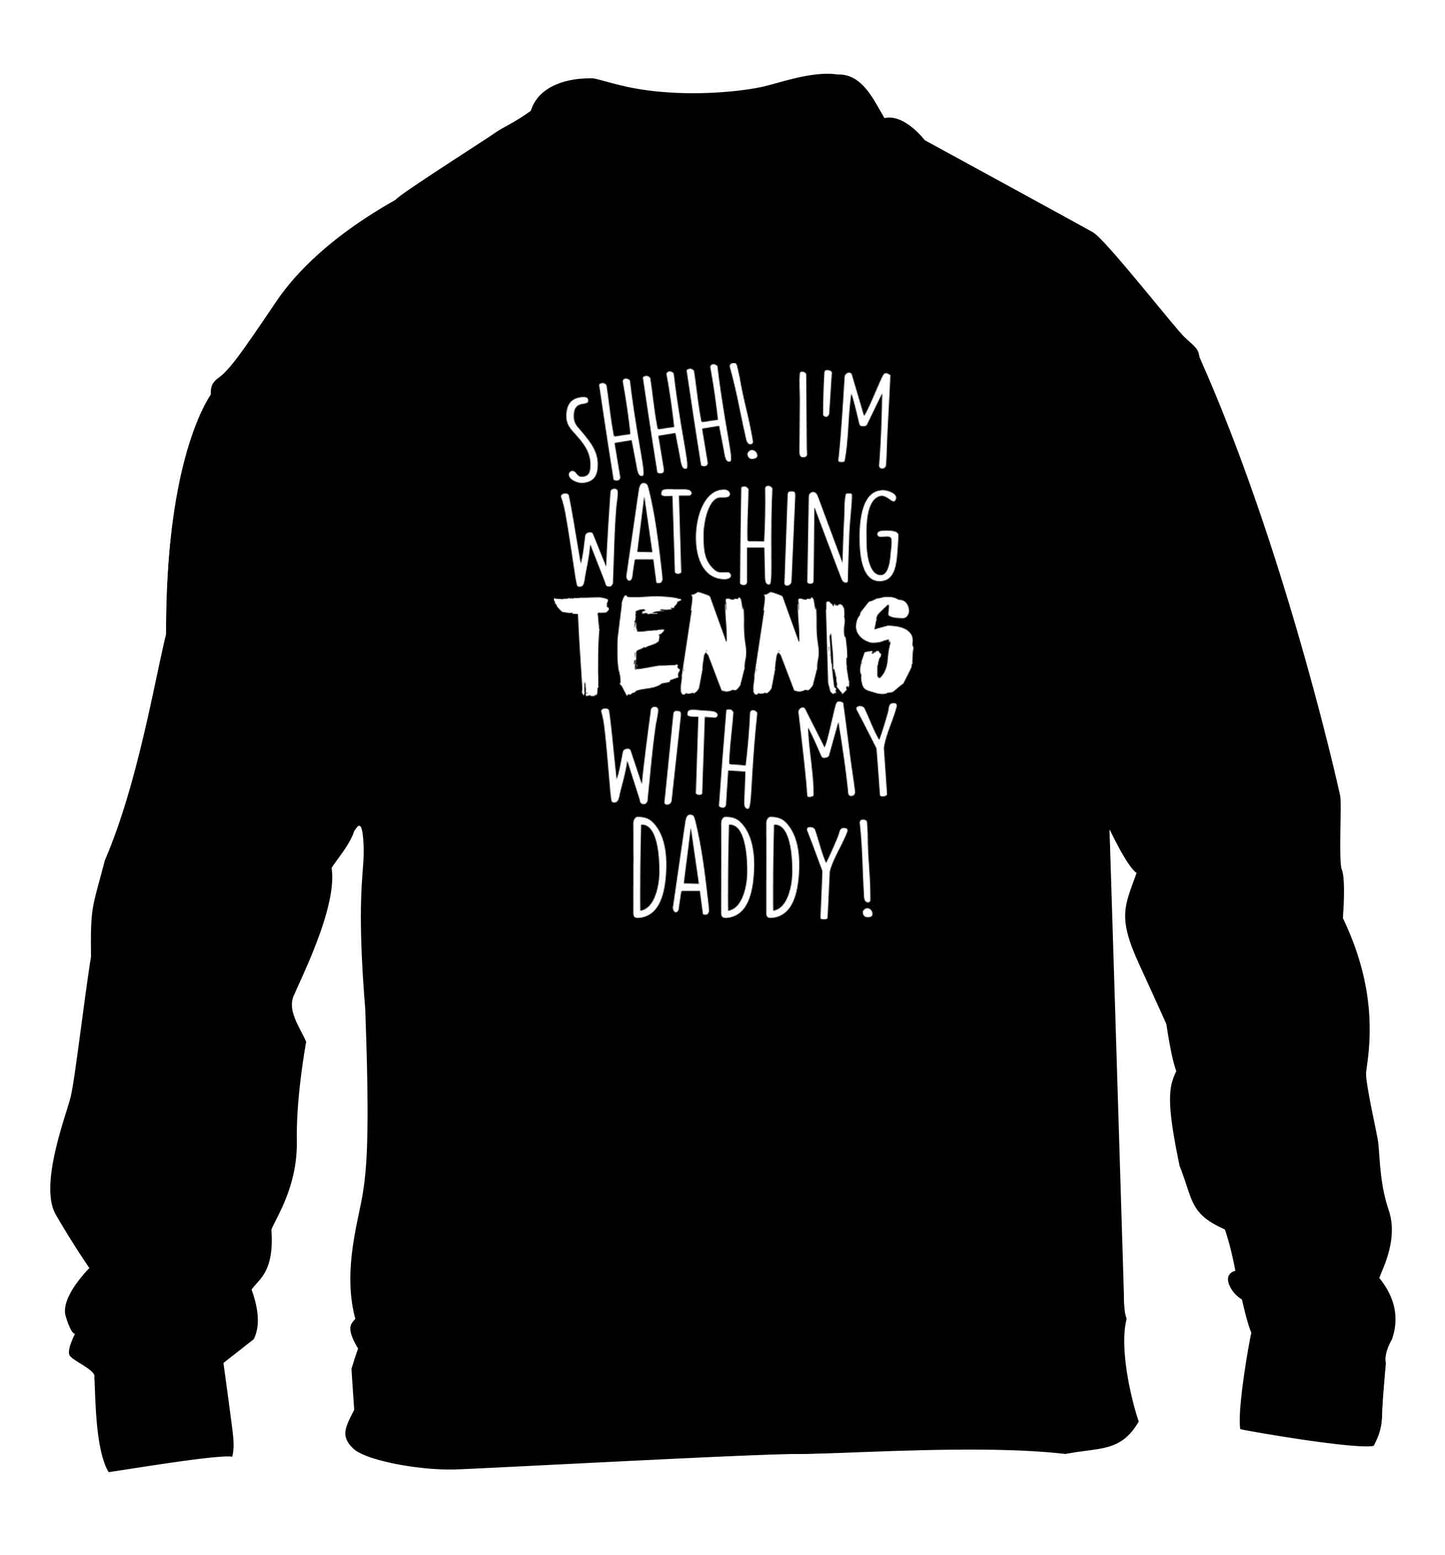 Shh! I'm watching tennis with my daddy! children's black sweater 12-13 Years